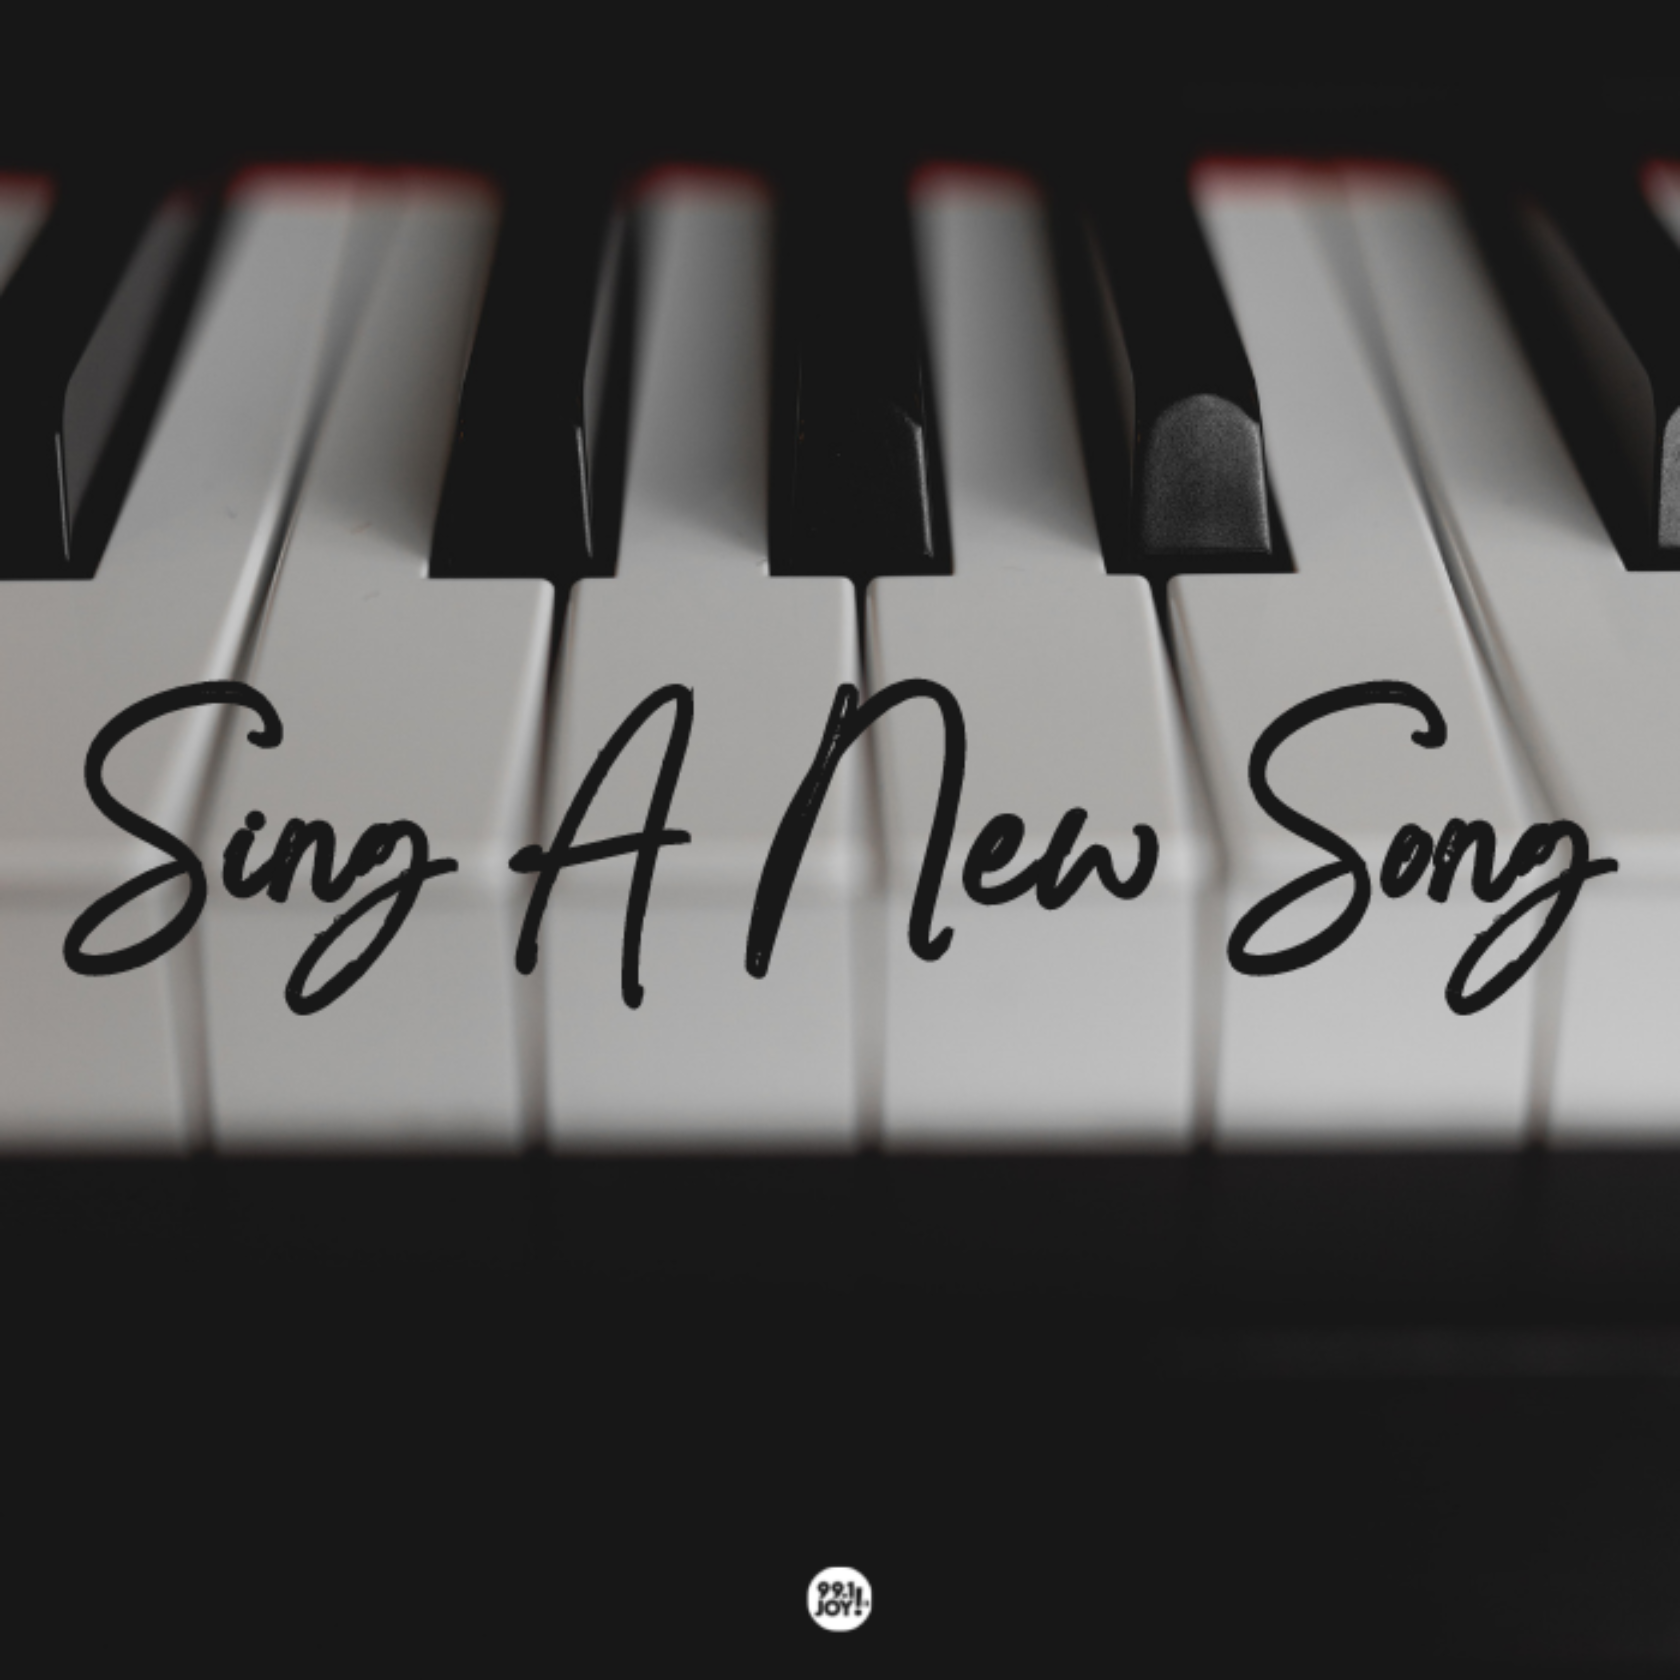 Sing A New Song